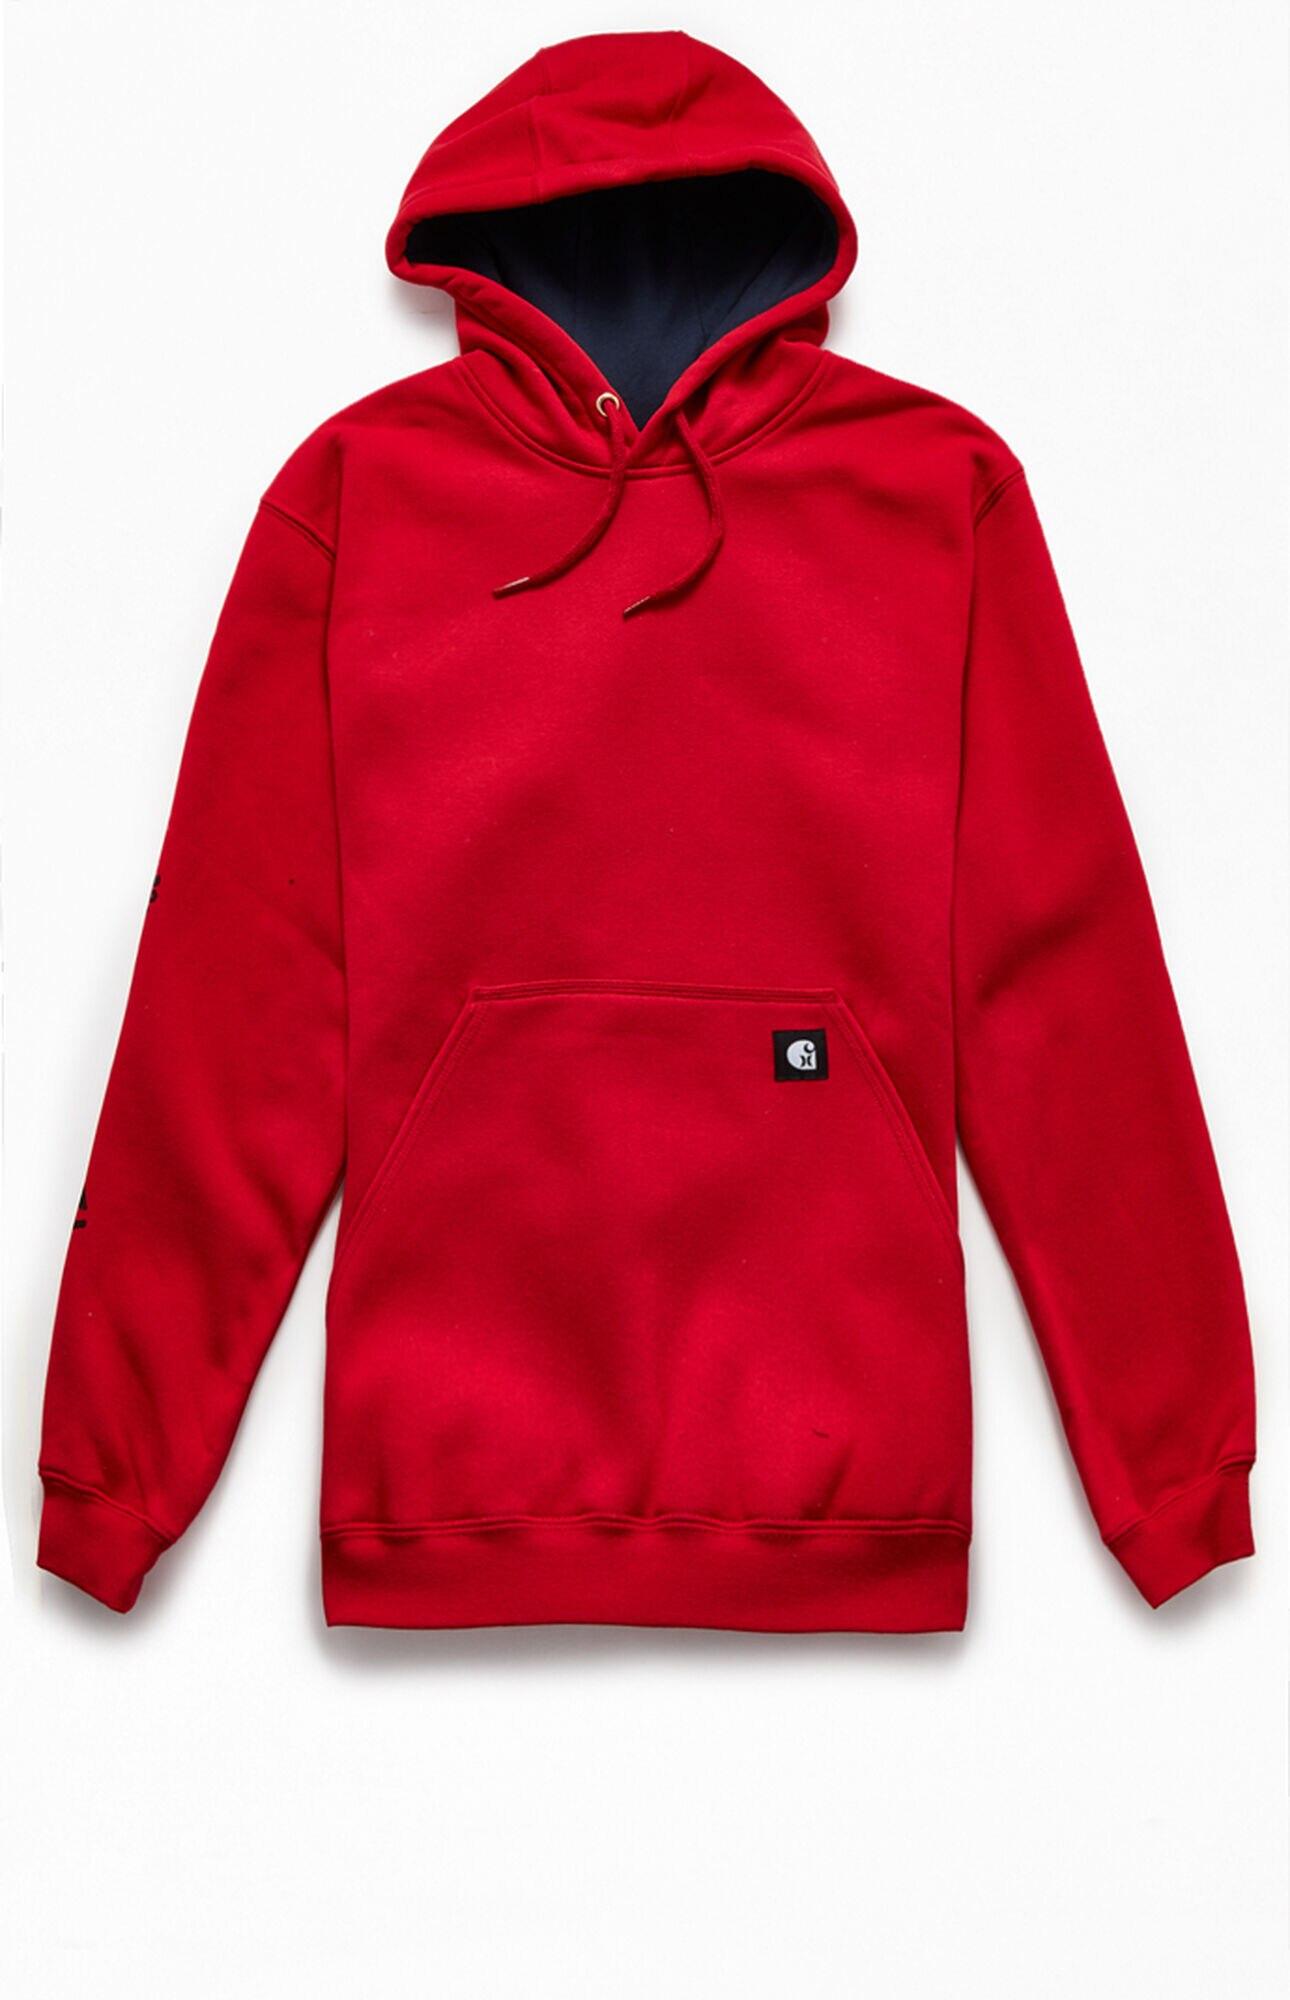 Hurley Cotton X Carhartt Loyal Hoodie in Red for Men - Lyst